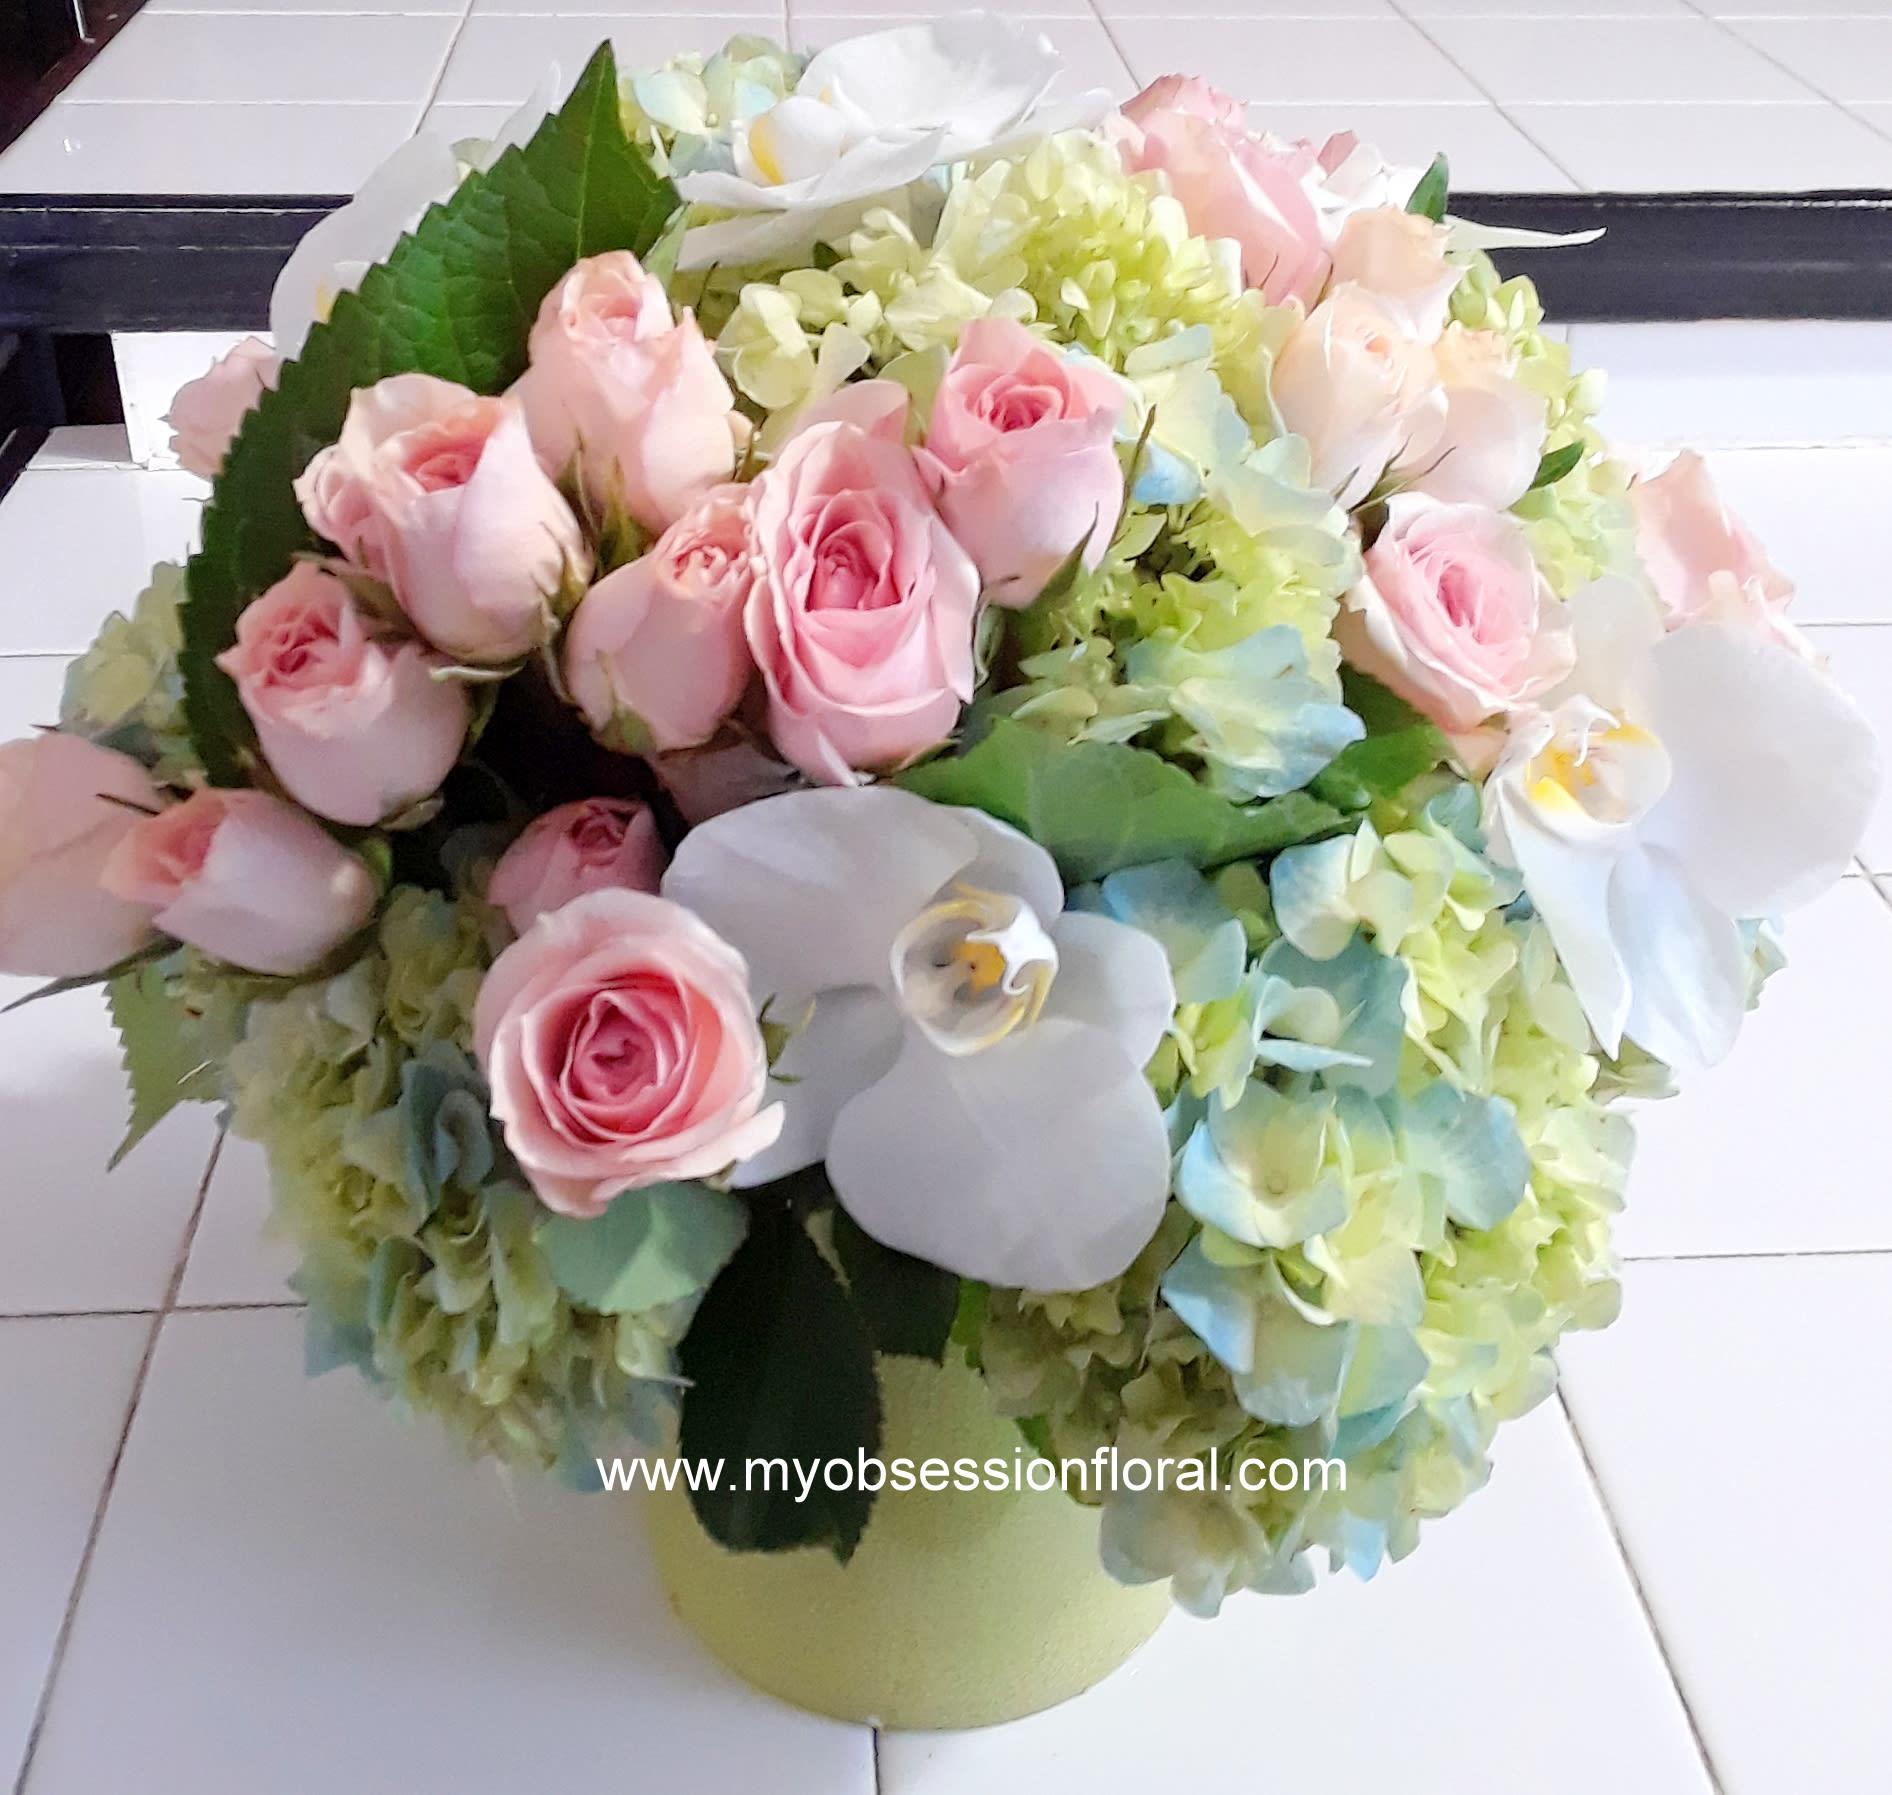 Sweet morning. - Fresh floral arrangement with orchids, miniature roses, and hydrangea come compact in sweet harmony. Too stunning!